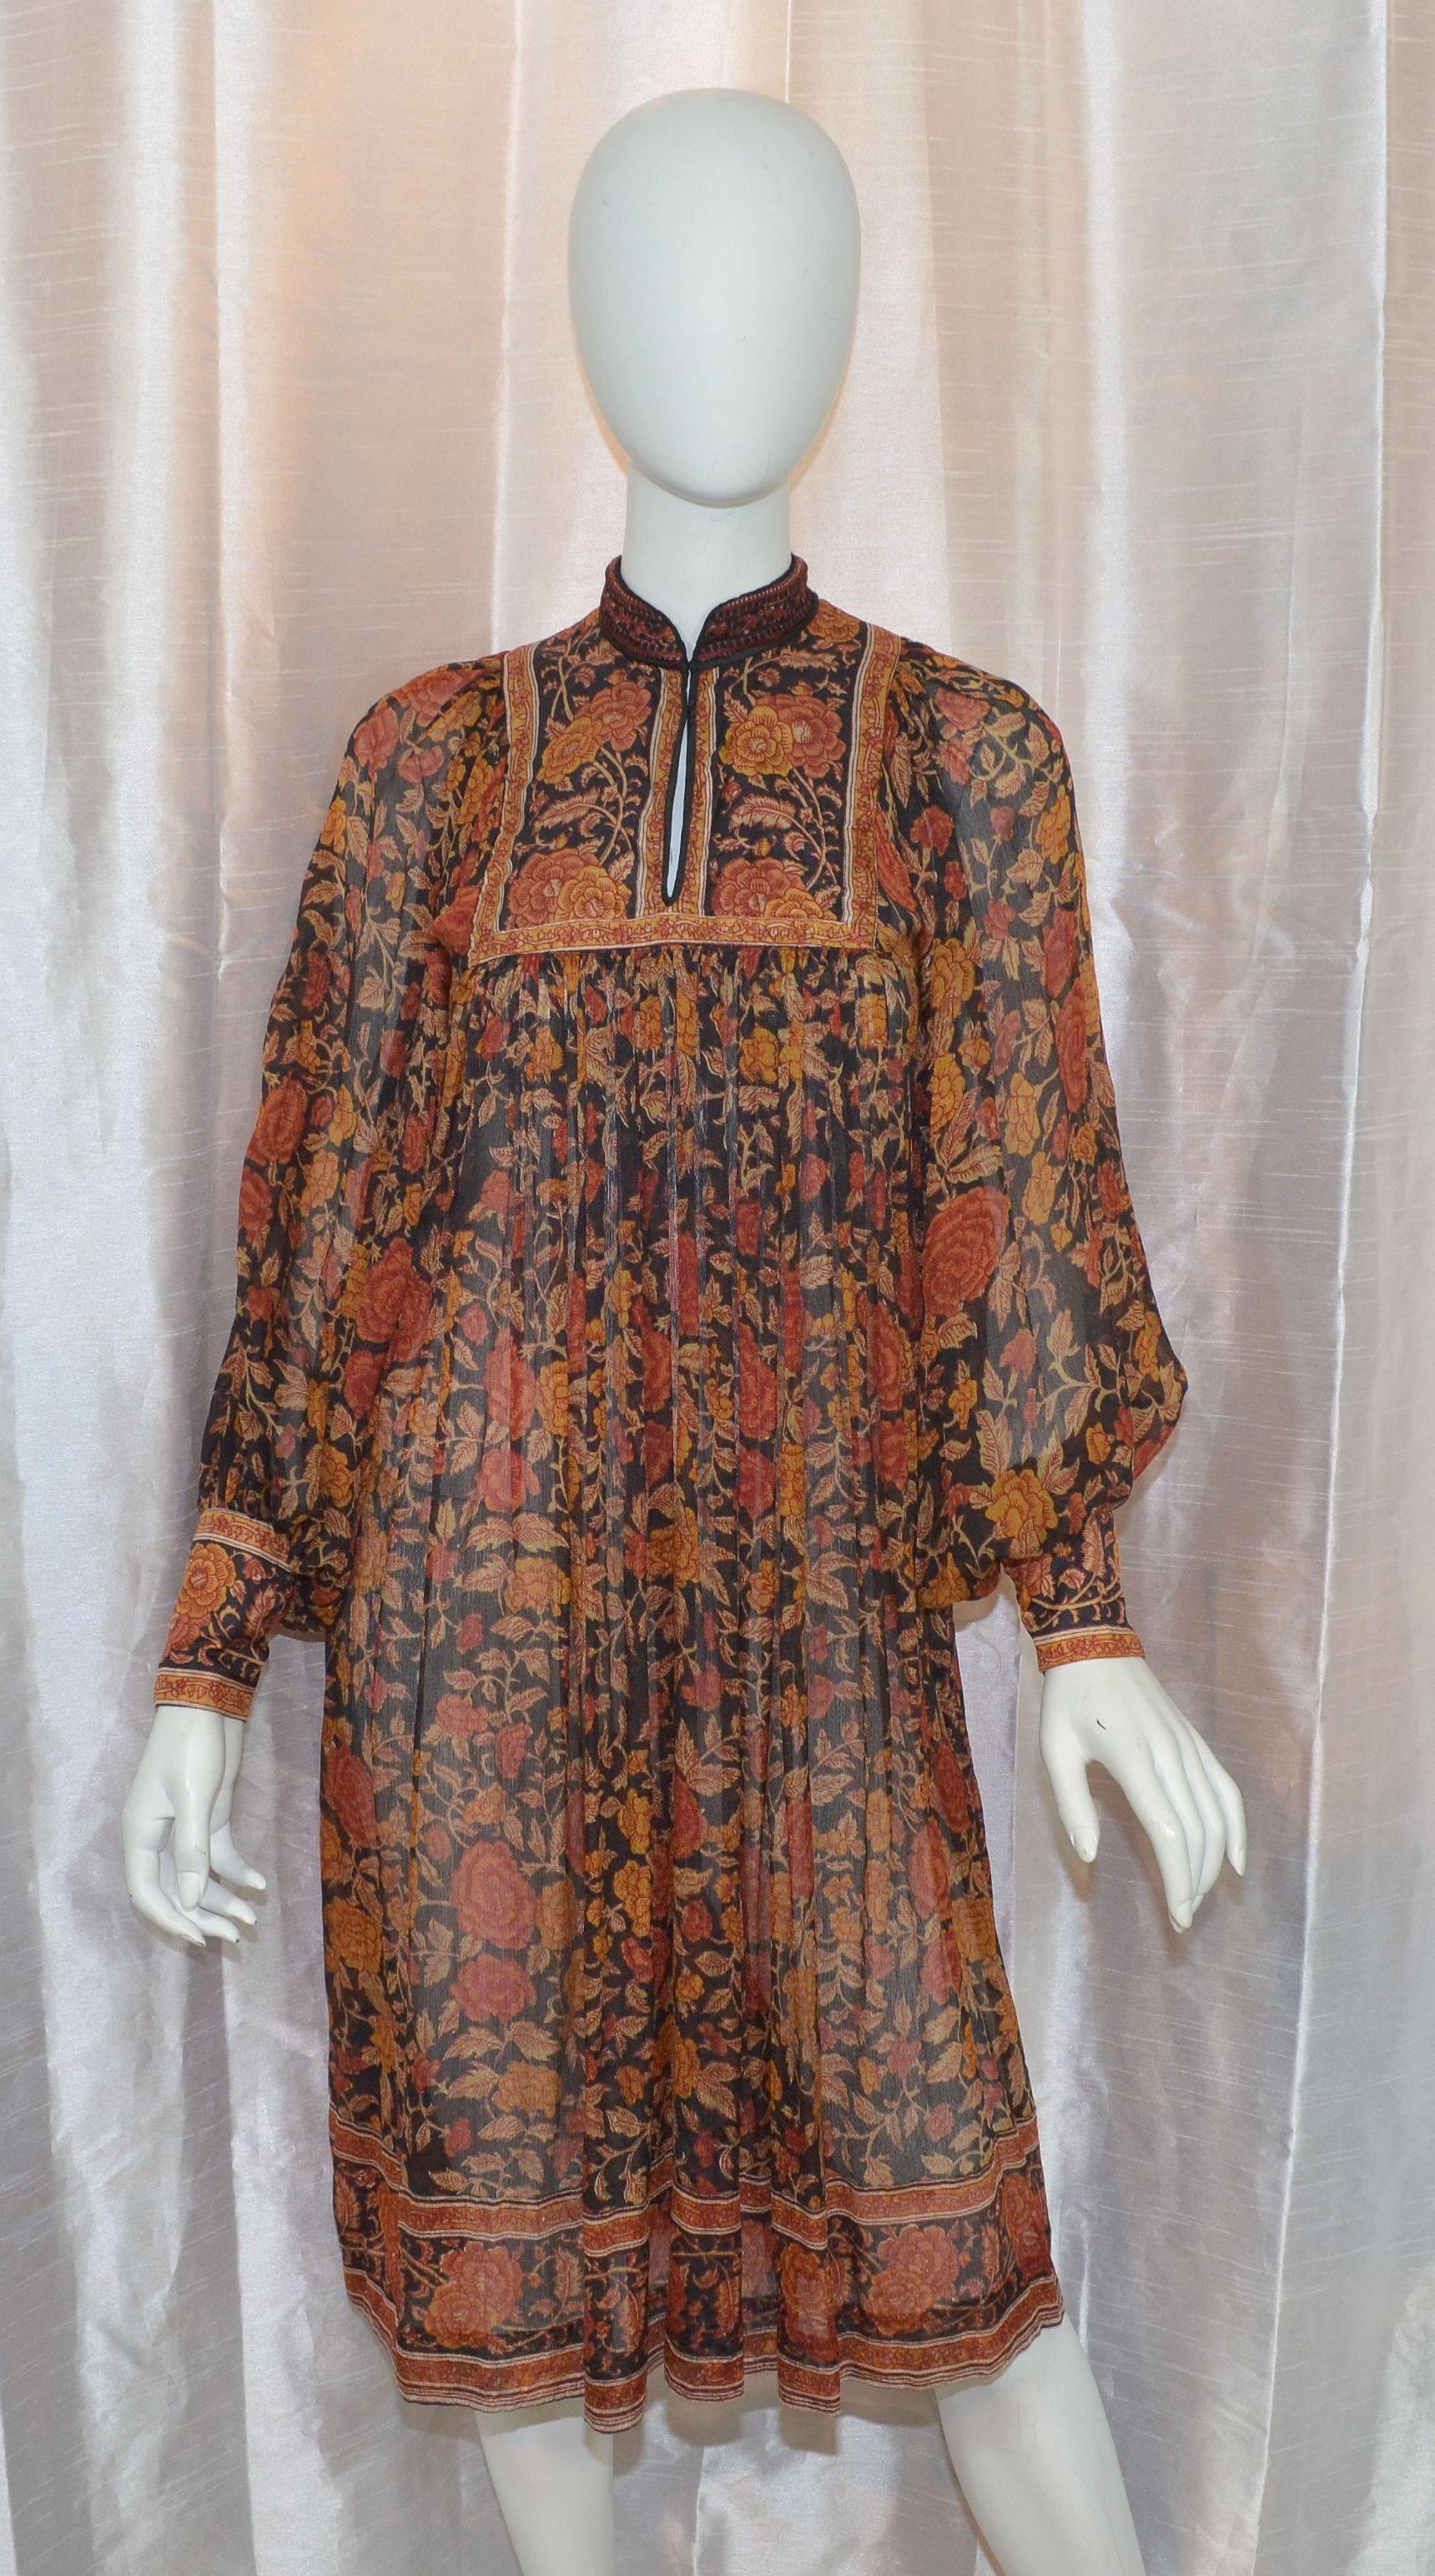 Ritu Kumar for Judith Ann boho style dress in 100% silk with a floral print in a variation of maroon, tan, and brown colors on a black background. Dress has cuffed sleeves with button fastenings and a hook-and-eye closure at the neck. Loose and